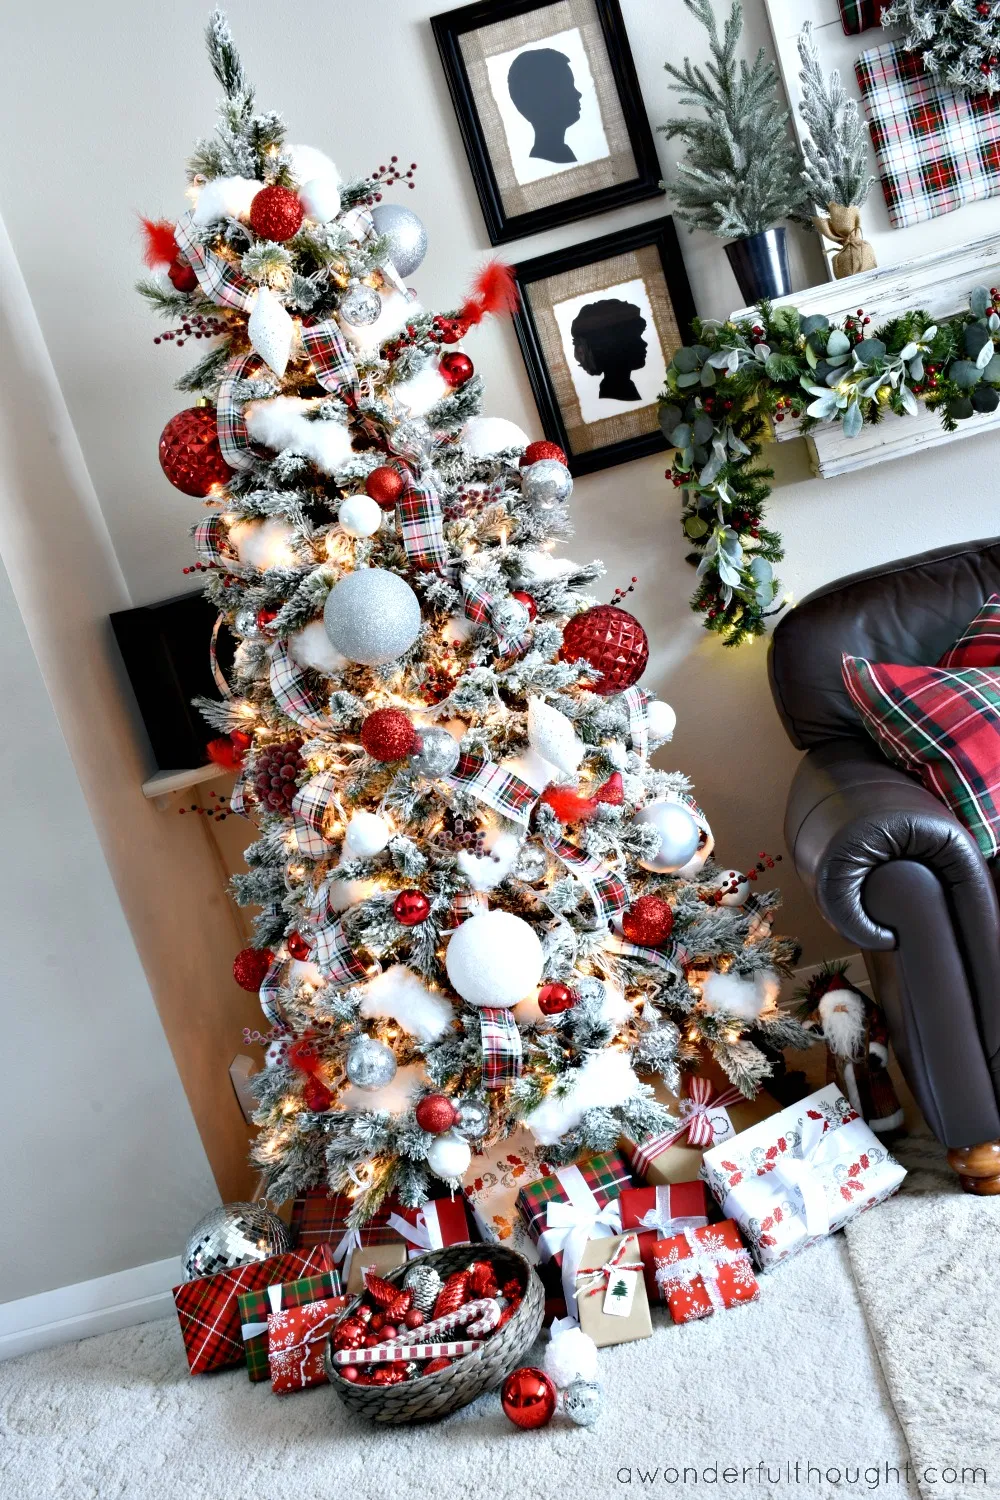 Red, Green and Plaid Christmas Tree - A Wonderful Thought - Red, Green and Plaid Christmas Tree - A Wonderful Thought -   17 christmas tree decorations 2020 ideas